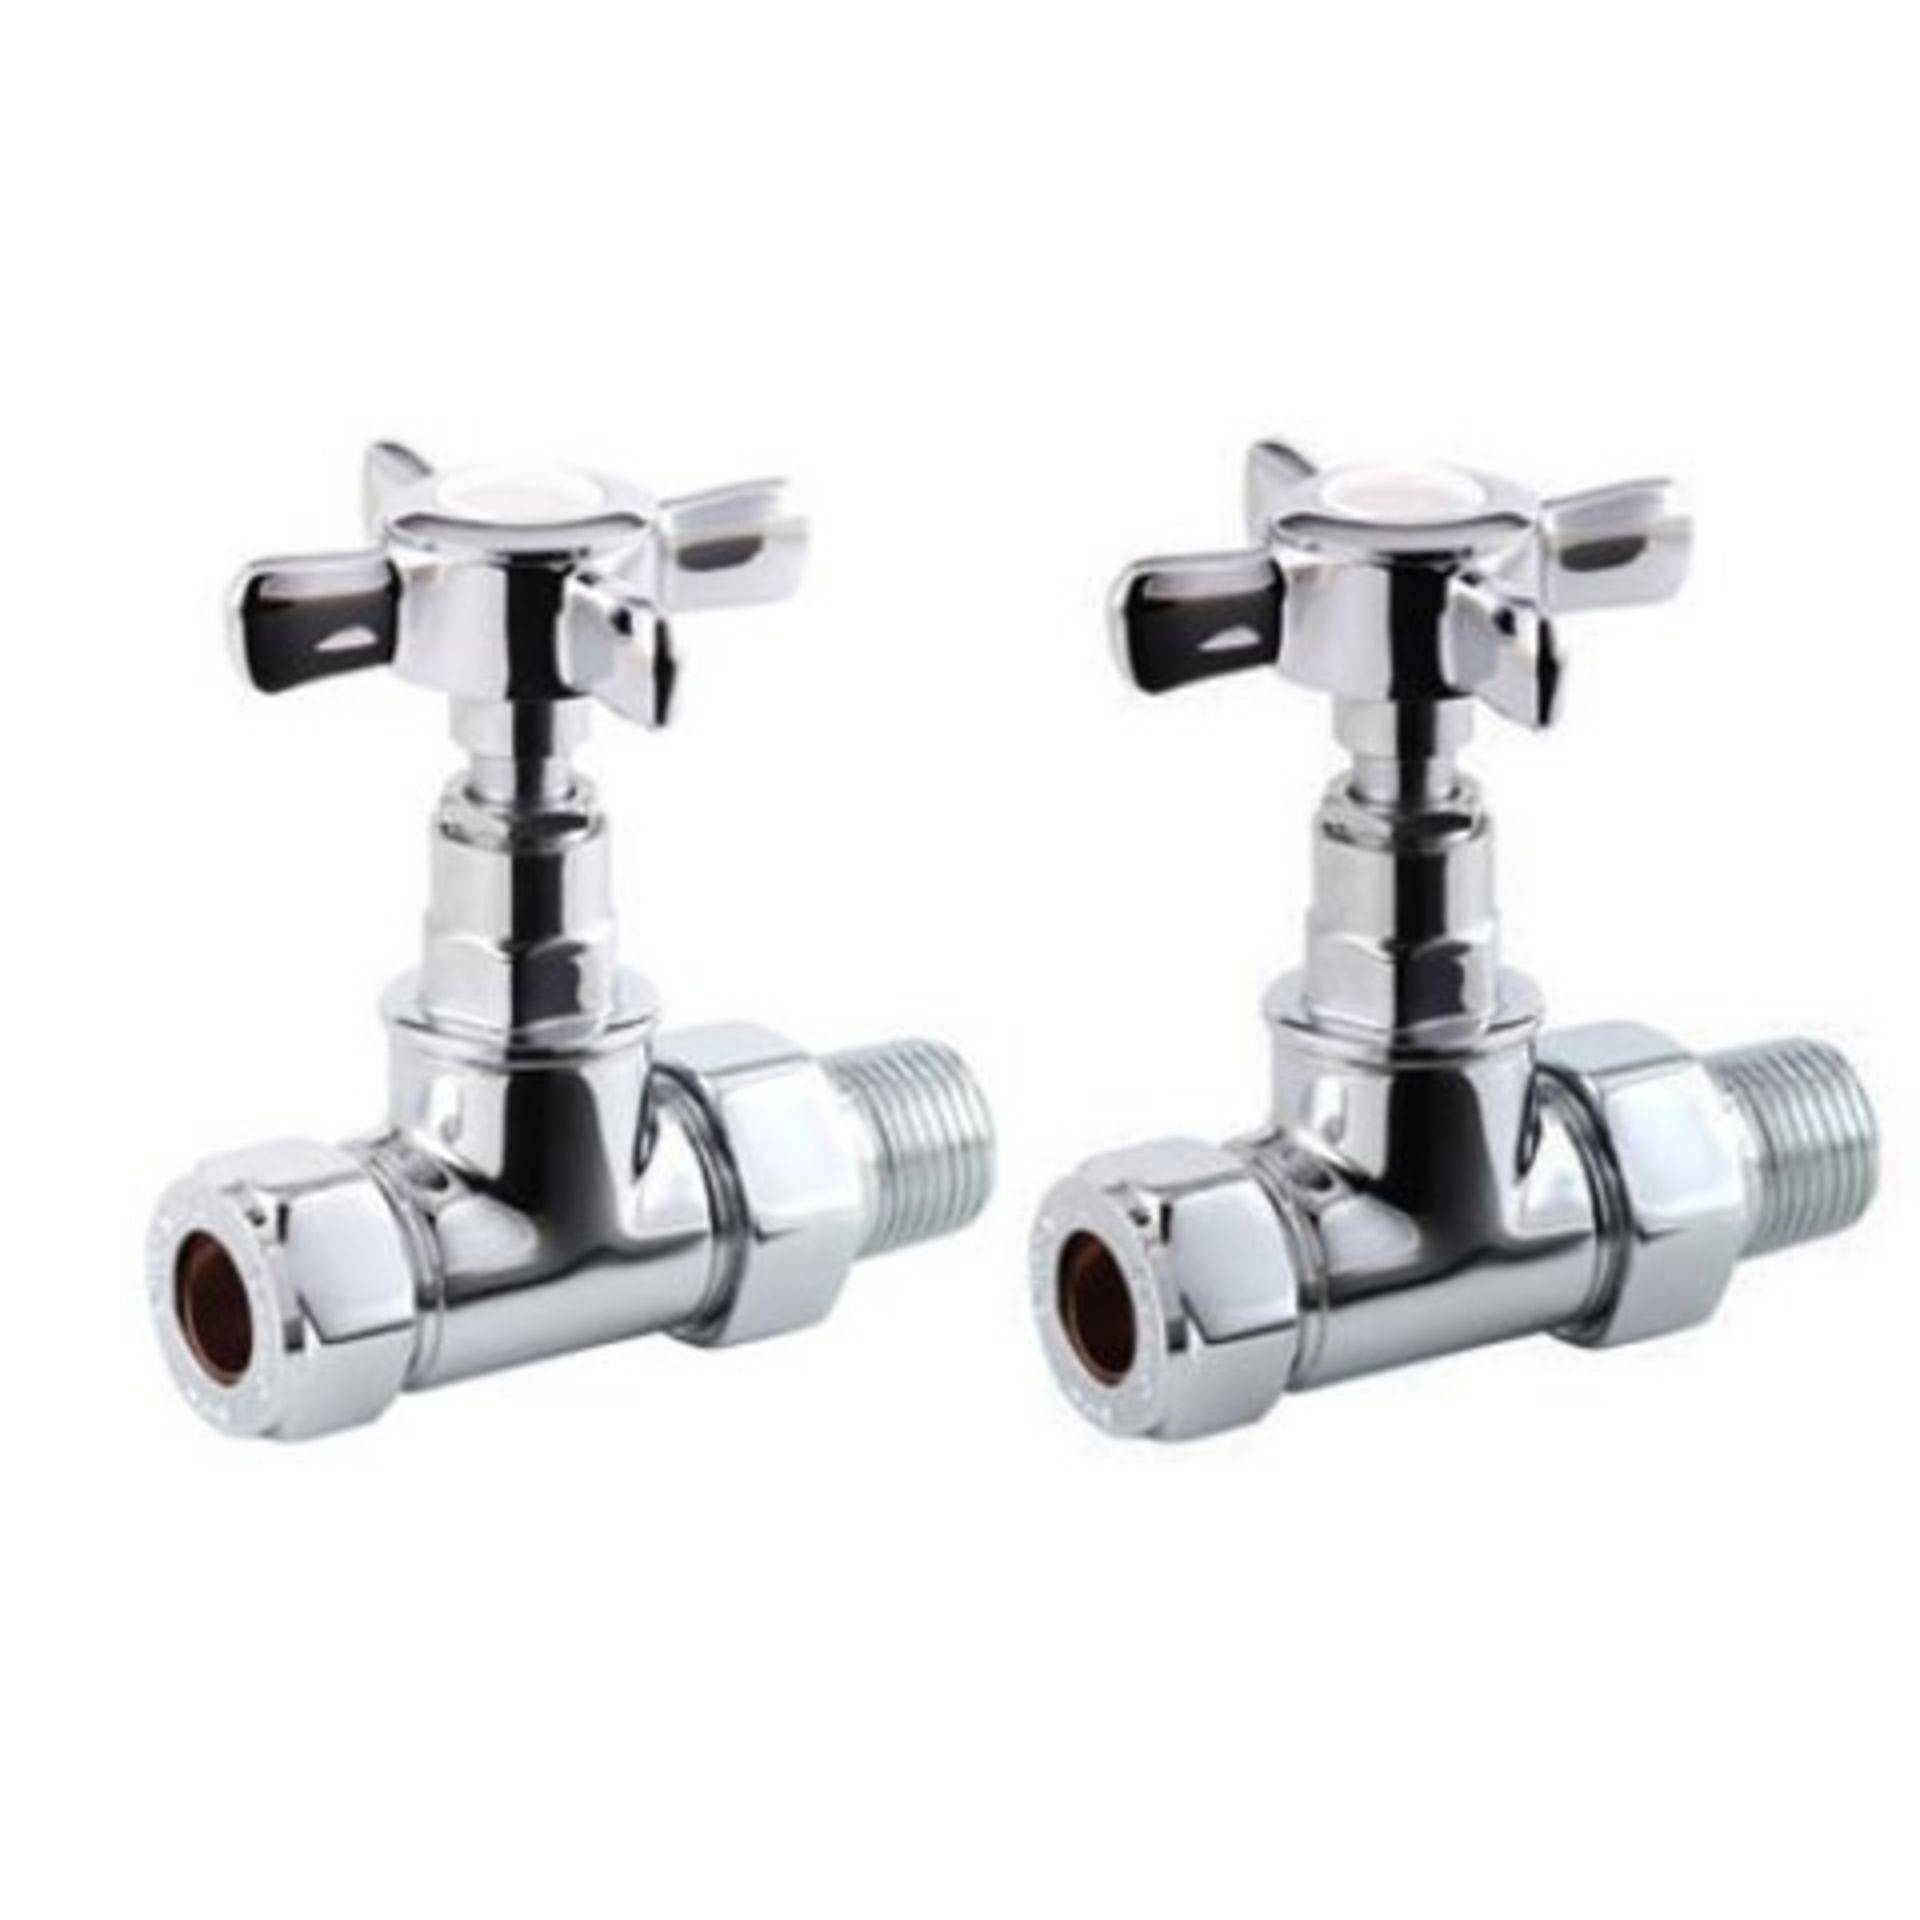 (I157) 15mm Standard Connection Straight Polished Chrome Radiator Valves Made of solid brass, our